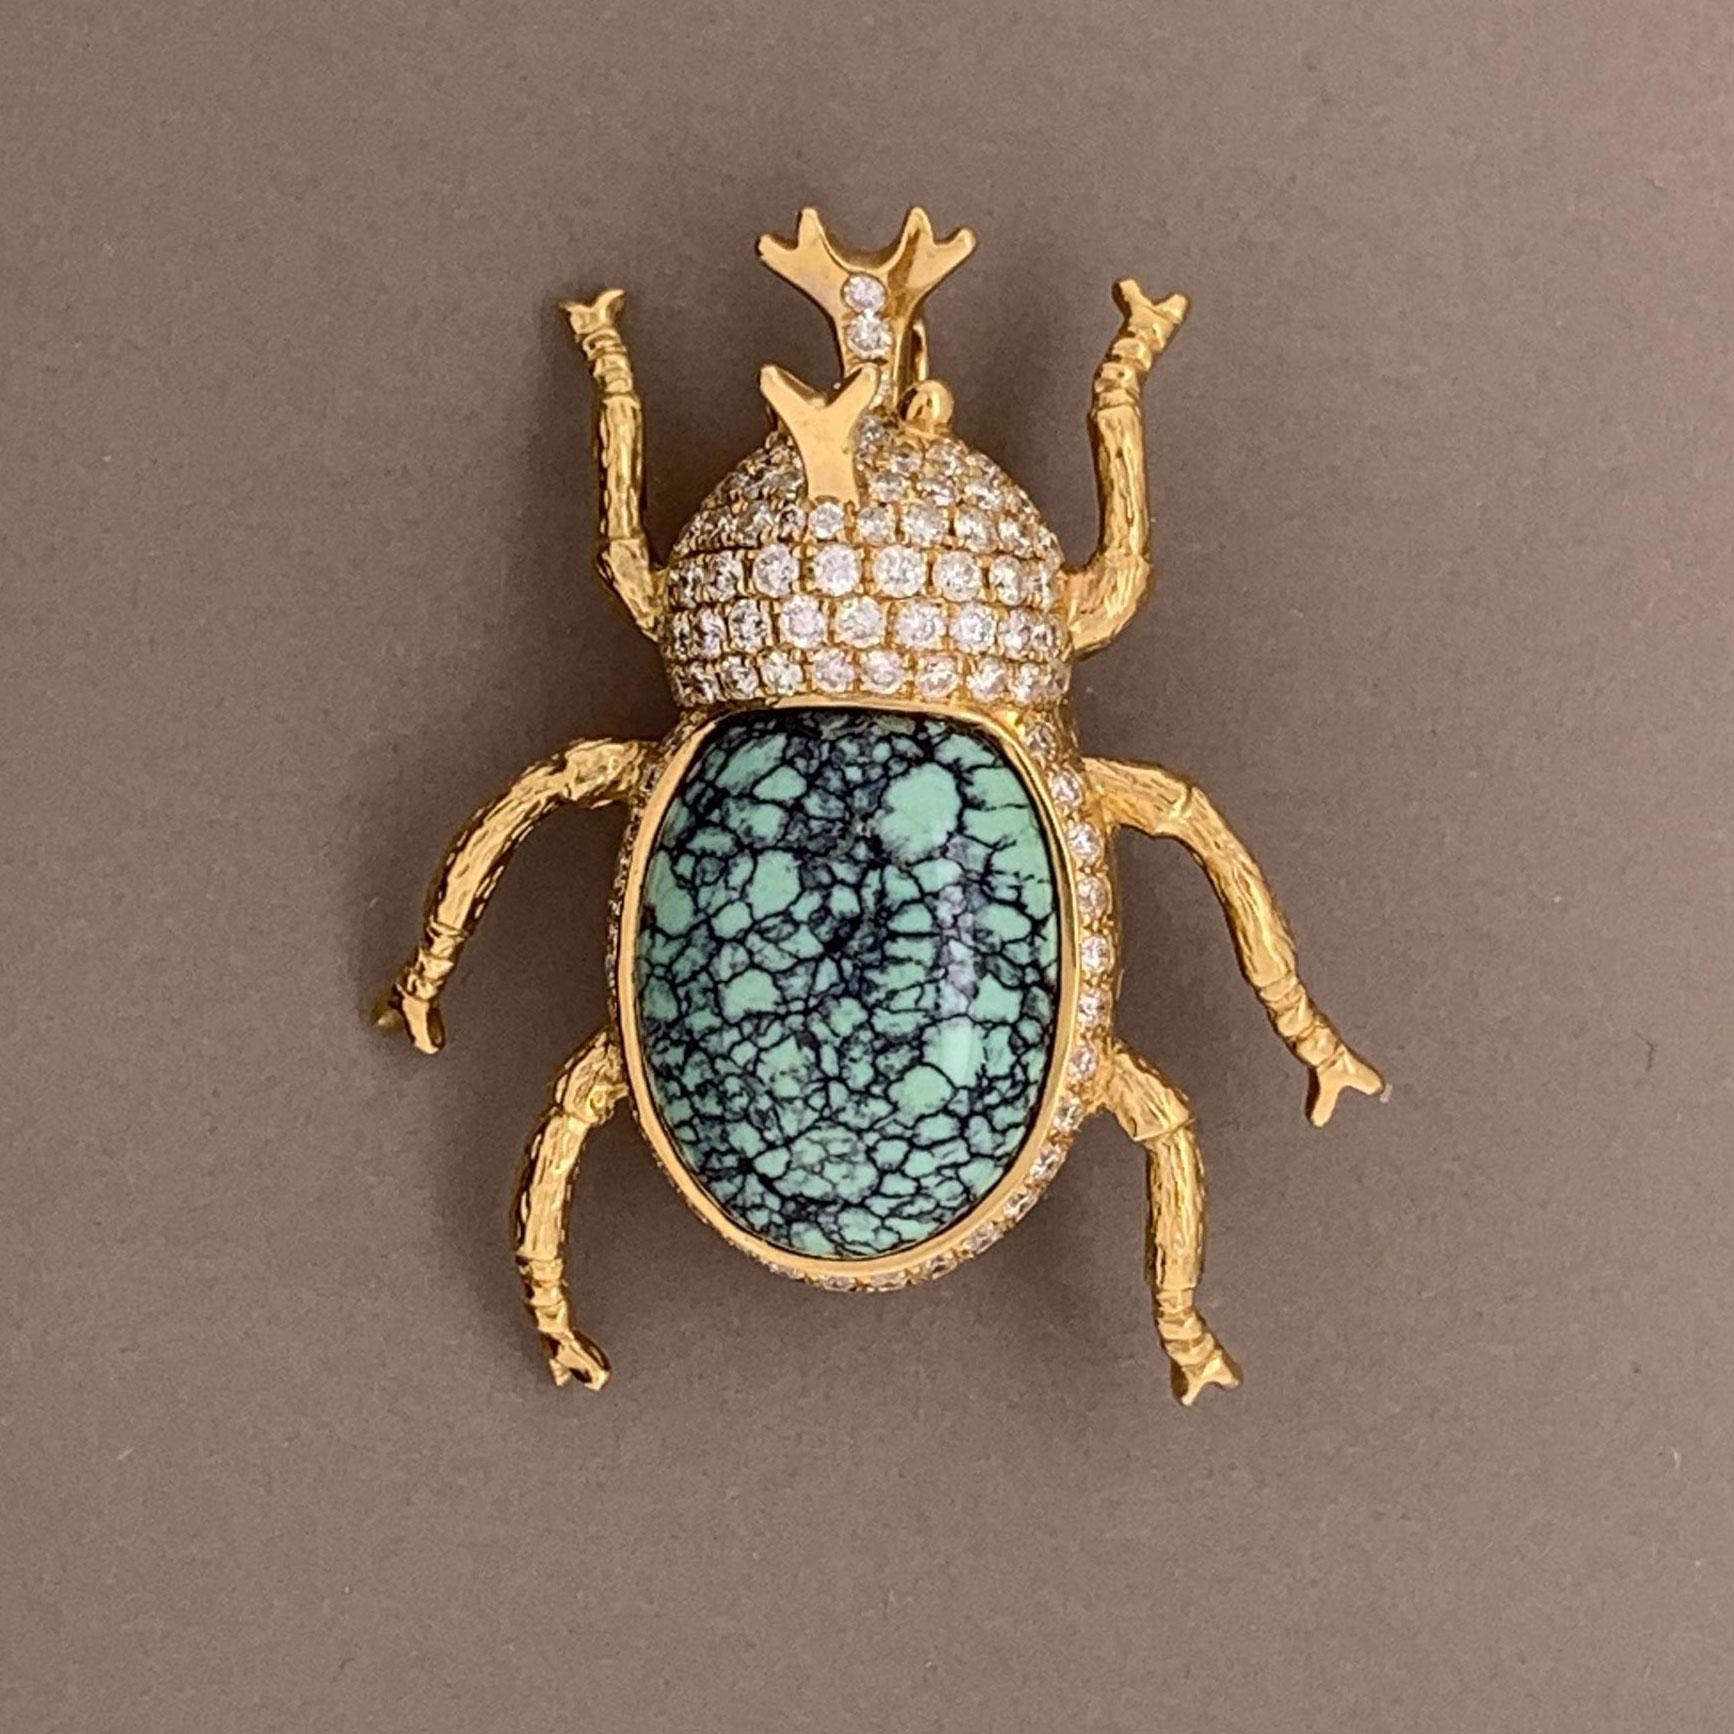 Beware of this beetle and its horn! This ferocious critter features 1.00 carat of round brilliant cut diamonds set around its body and horn. A fine piece of spiderweb turquoise is used for its abdomen which adds contrast and realism to this piece.